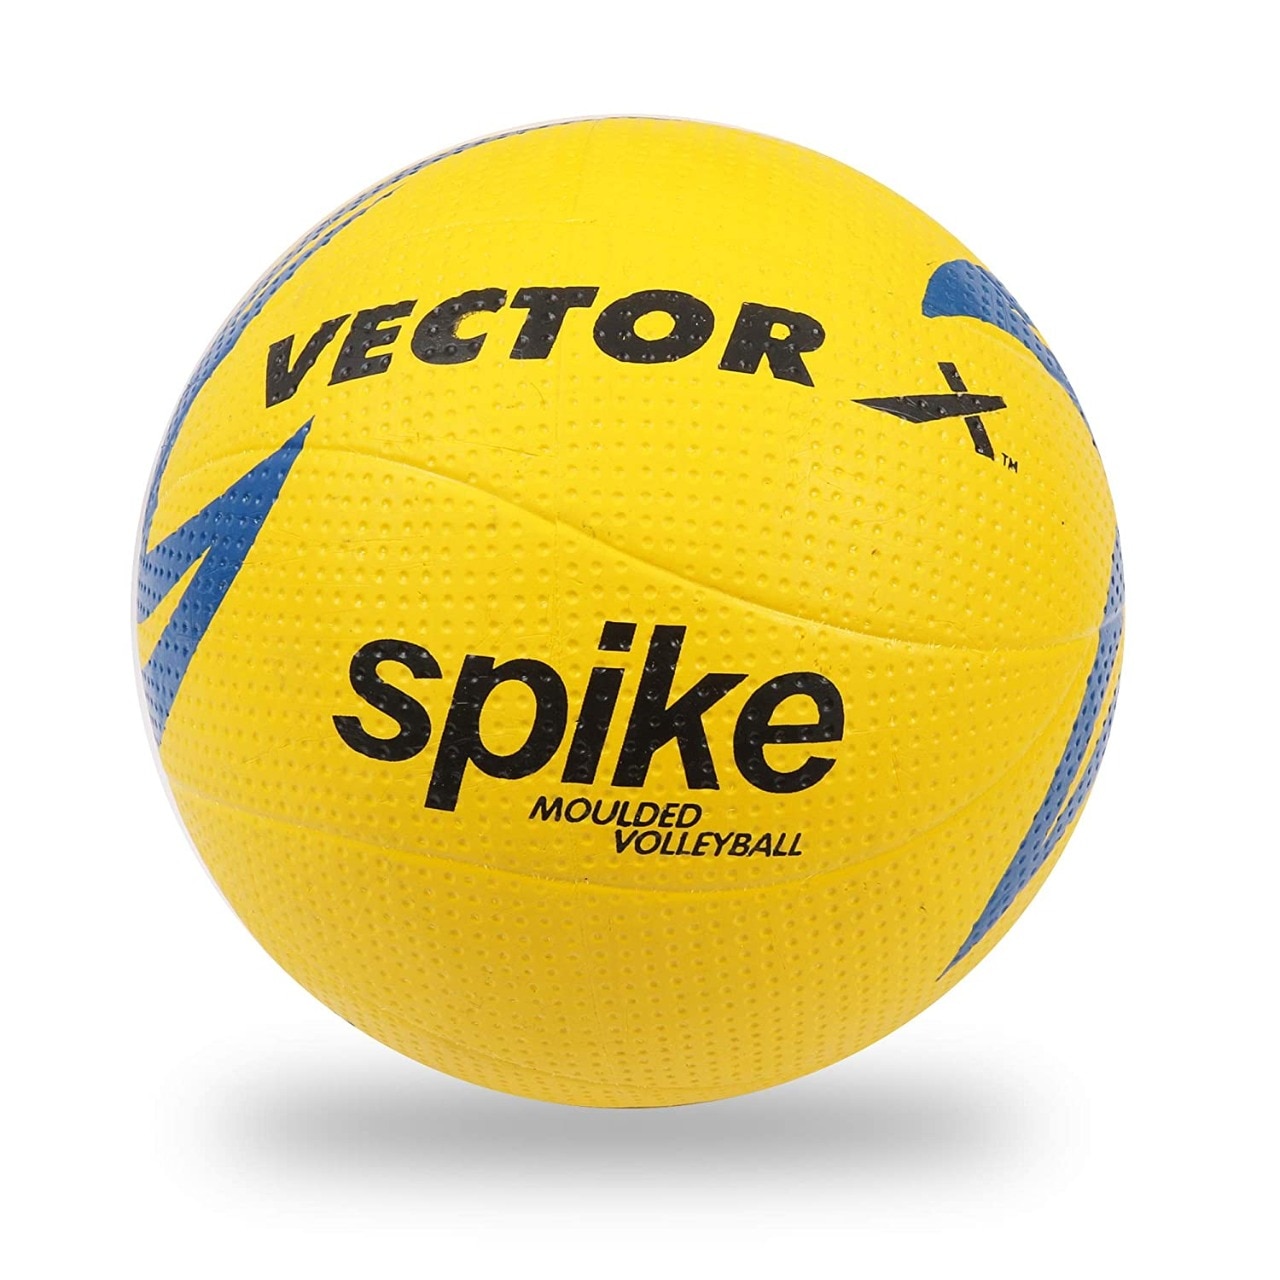 Amazon Festival Sale: Largest Sale of Sports Items, Buy Volleyball, Basketball, Tennis and Badminton under Rs.500